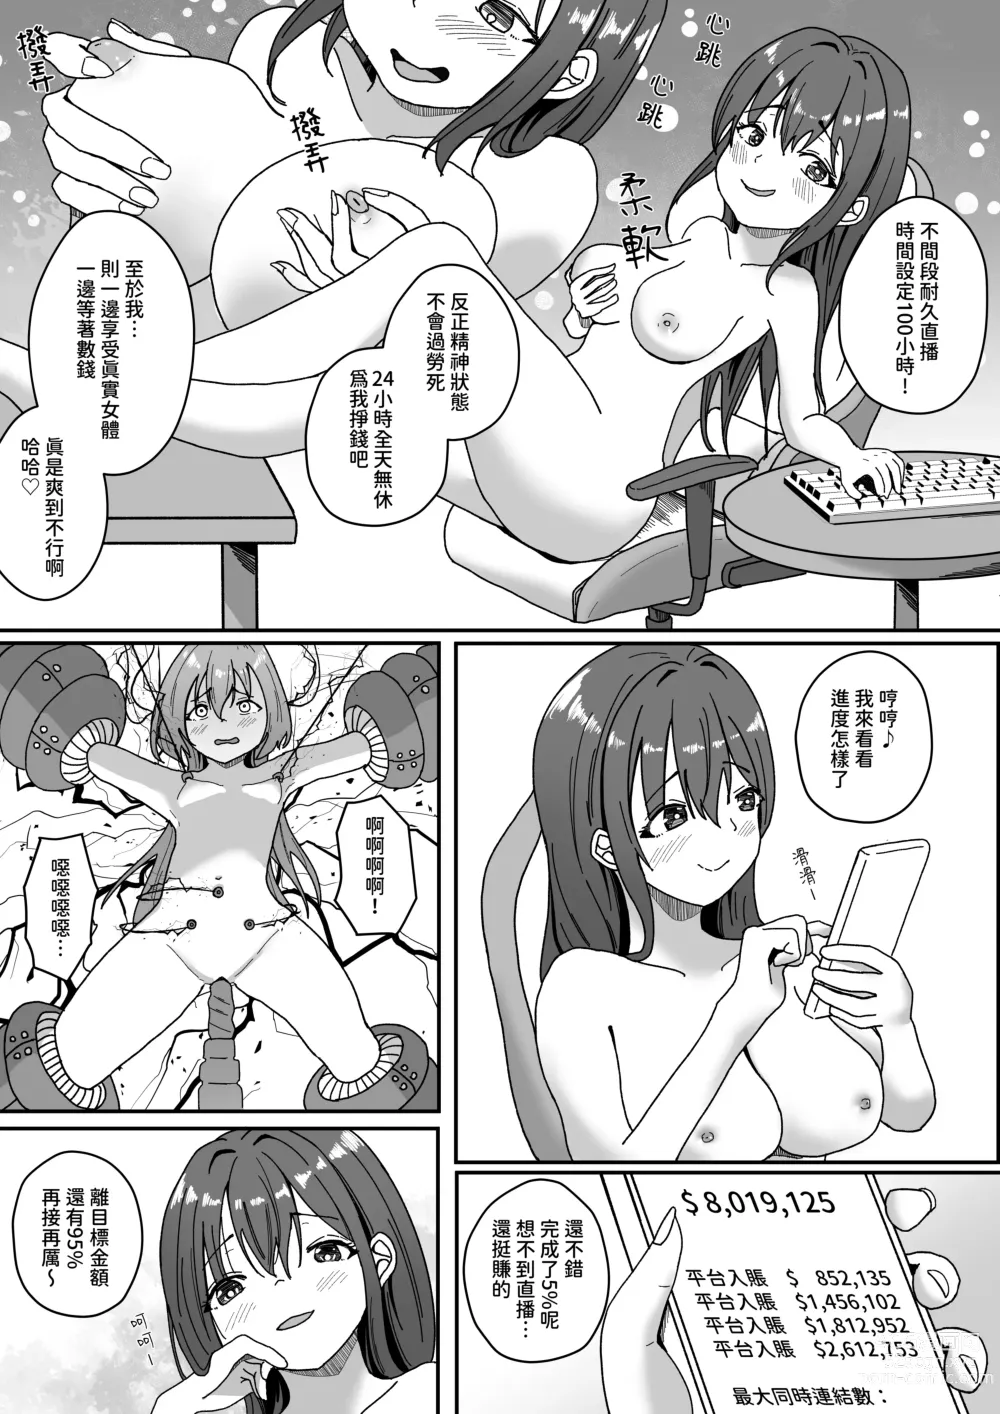 Page 3 of doujinshi VR2(Vacancy Replacement2) 中文CHN